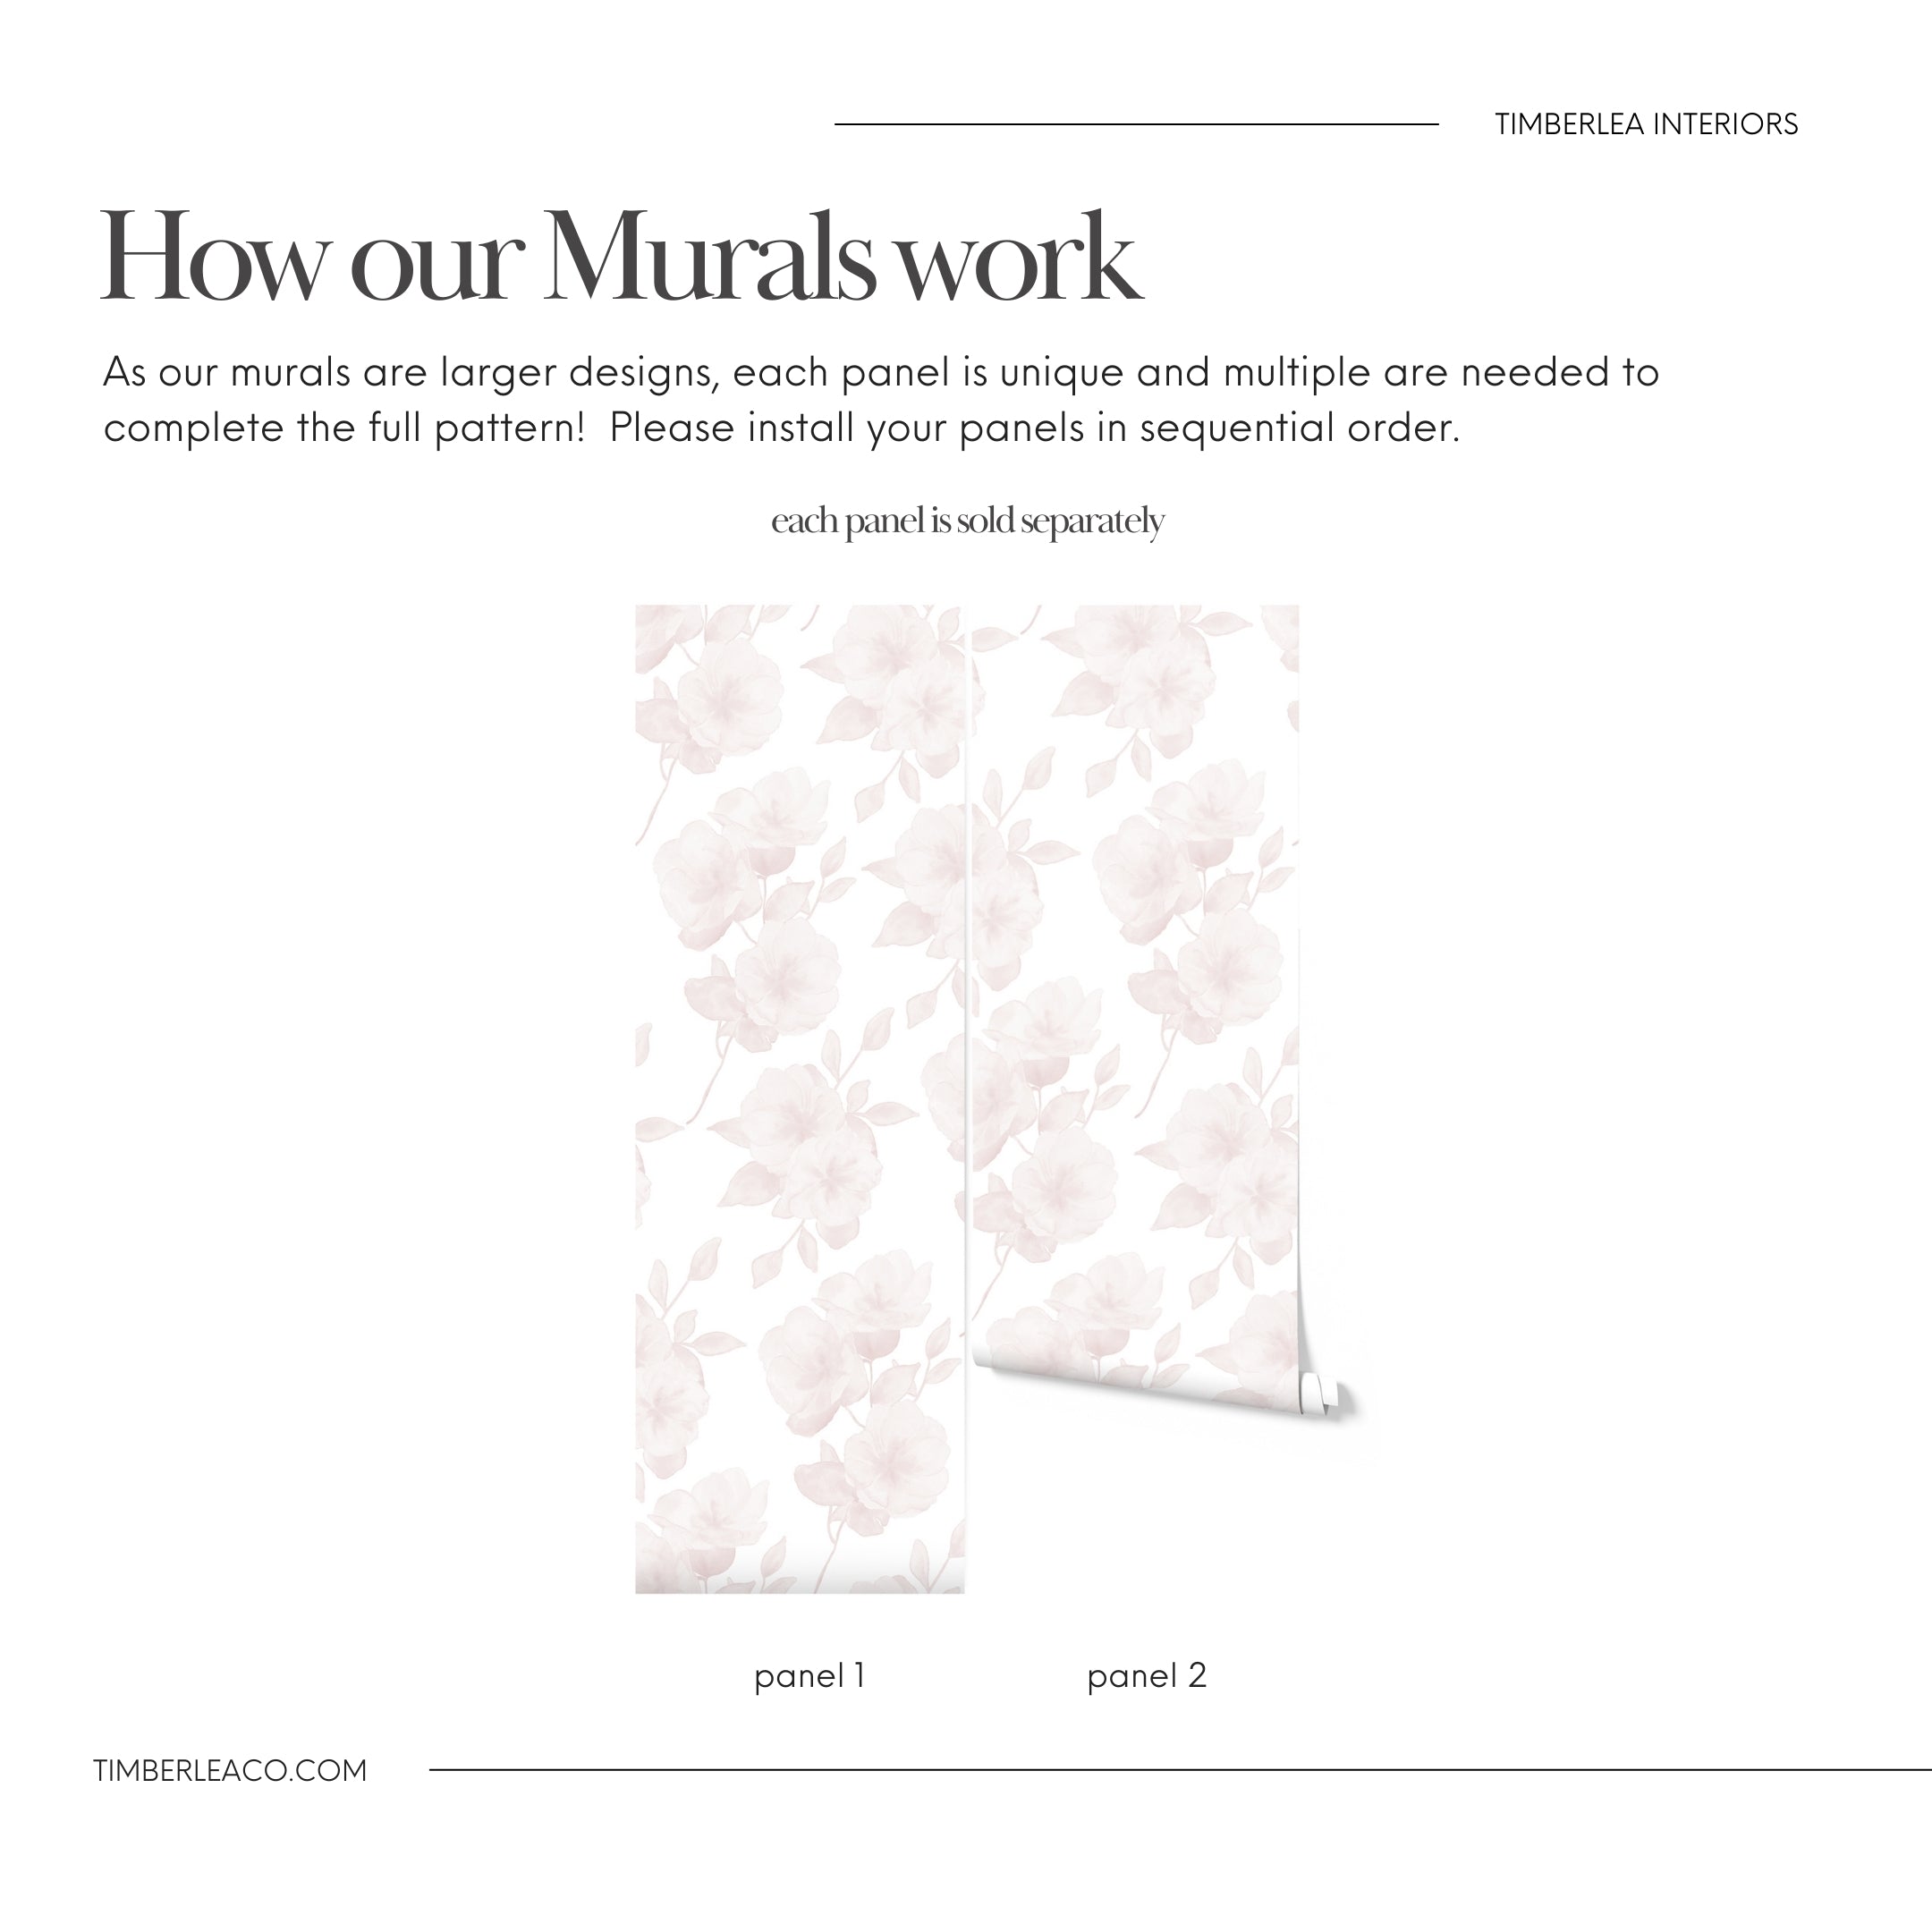 Timberlea Interiors showcasing their Minimal Floral Wallpaper V. The image explains how the mural-style wallpaper works, with each panel being unique and sold separately. Two samples are labeled as "panel 1" and "panel 2" against a white background, featuring soft, watercolor-style blush flowers.